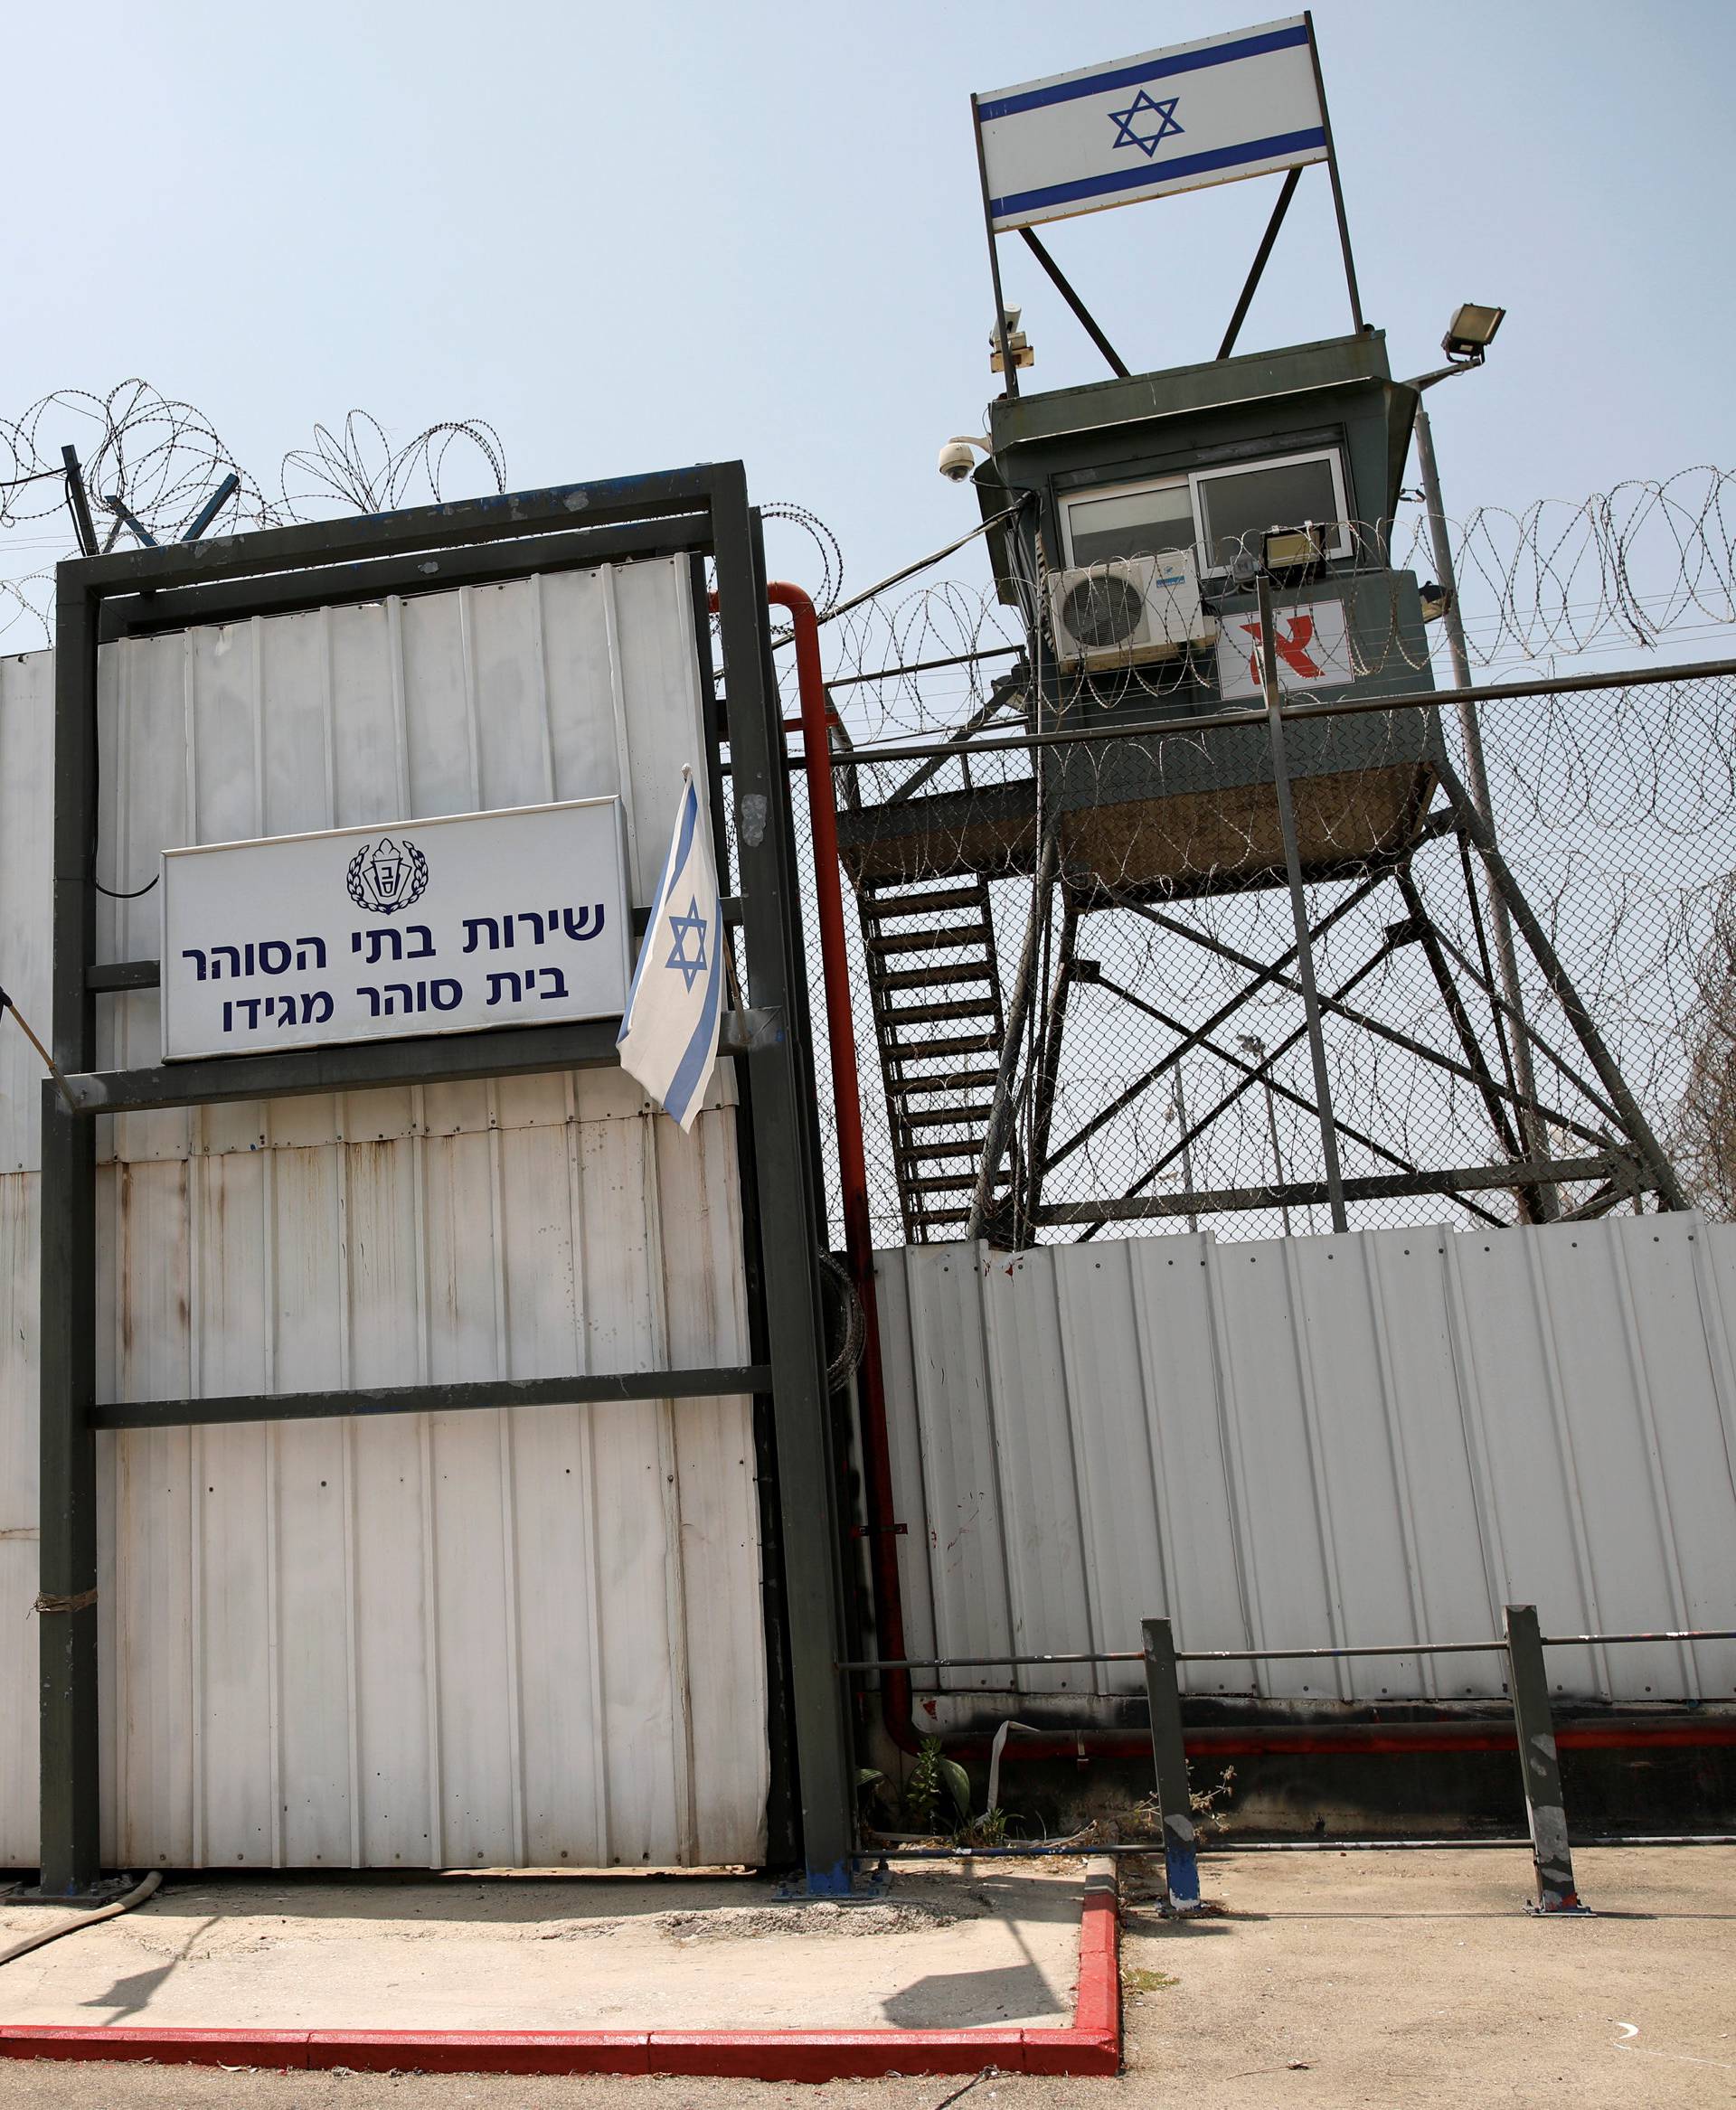 An Israeli flag is seen next to the gate of the Megiddo Prison